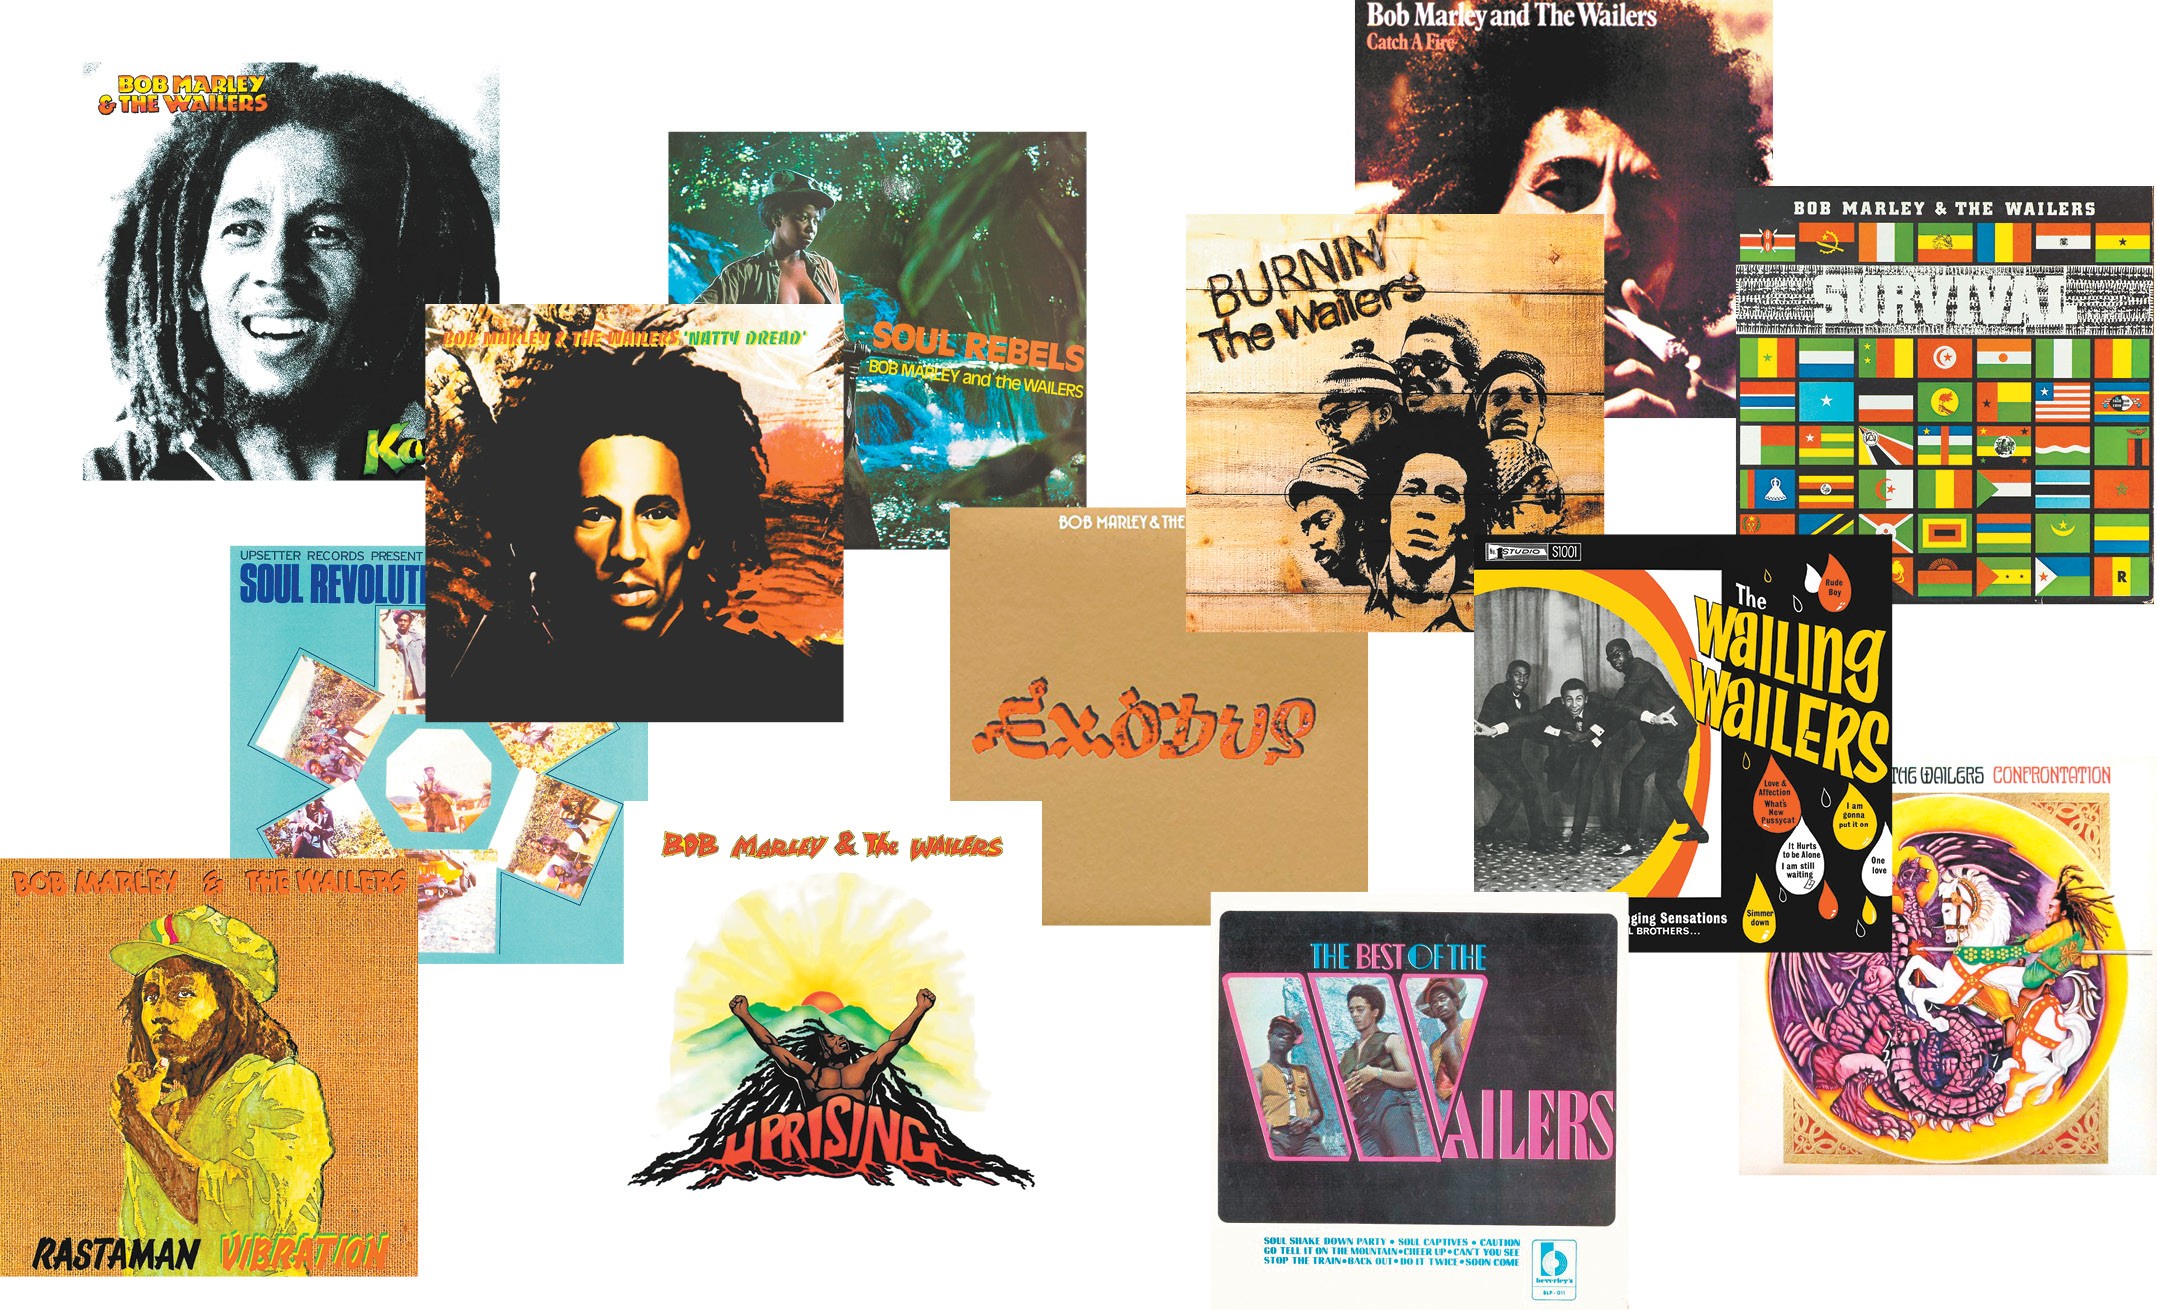 On the 40th anniversary of Uprising, Bob Marley's final album before his death, we consider where it ranks among the reggae legend's catalog